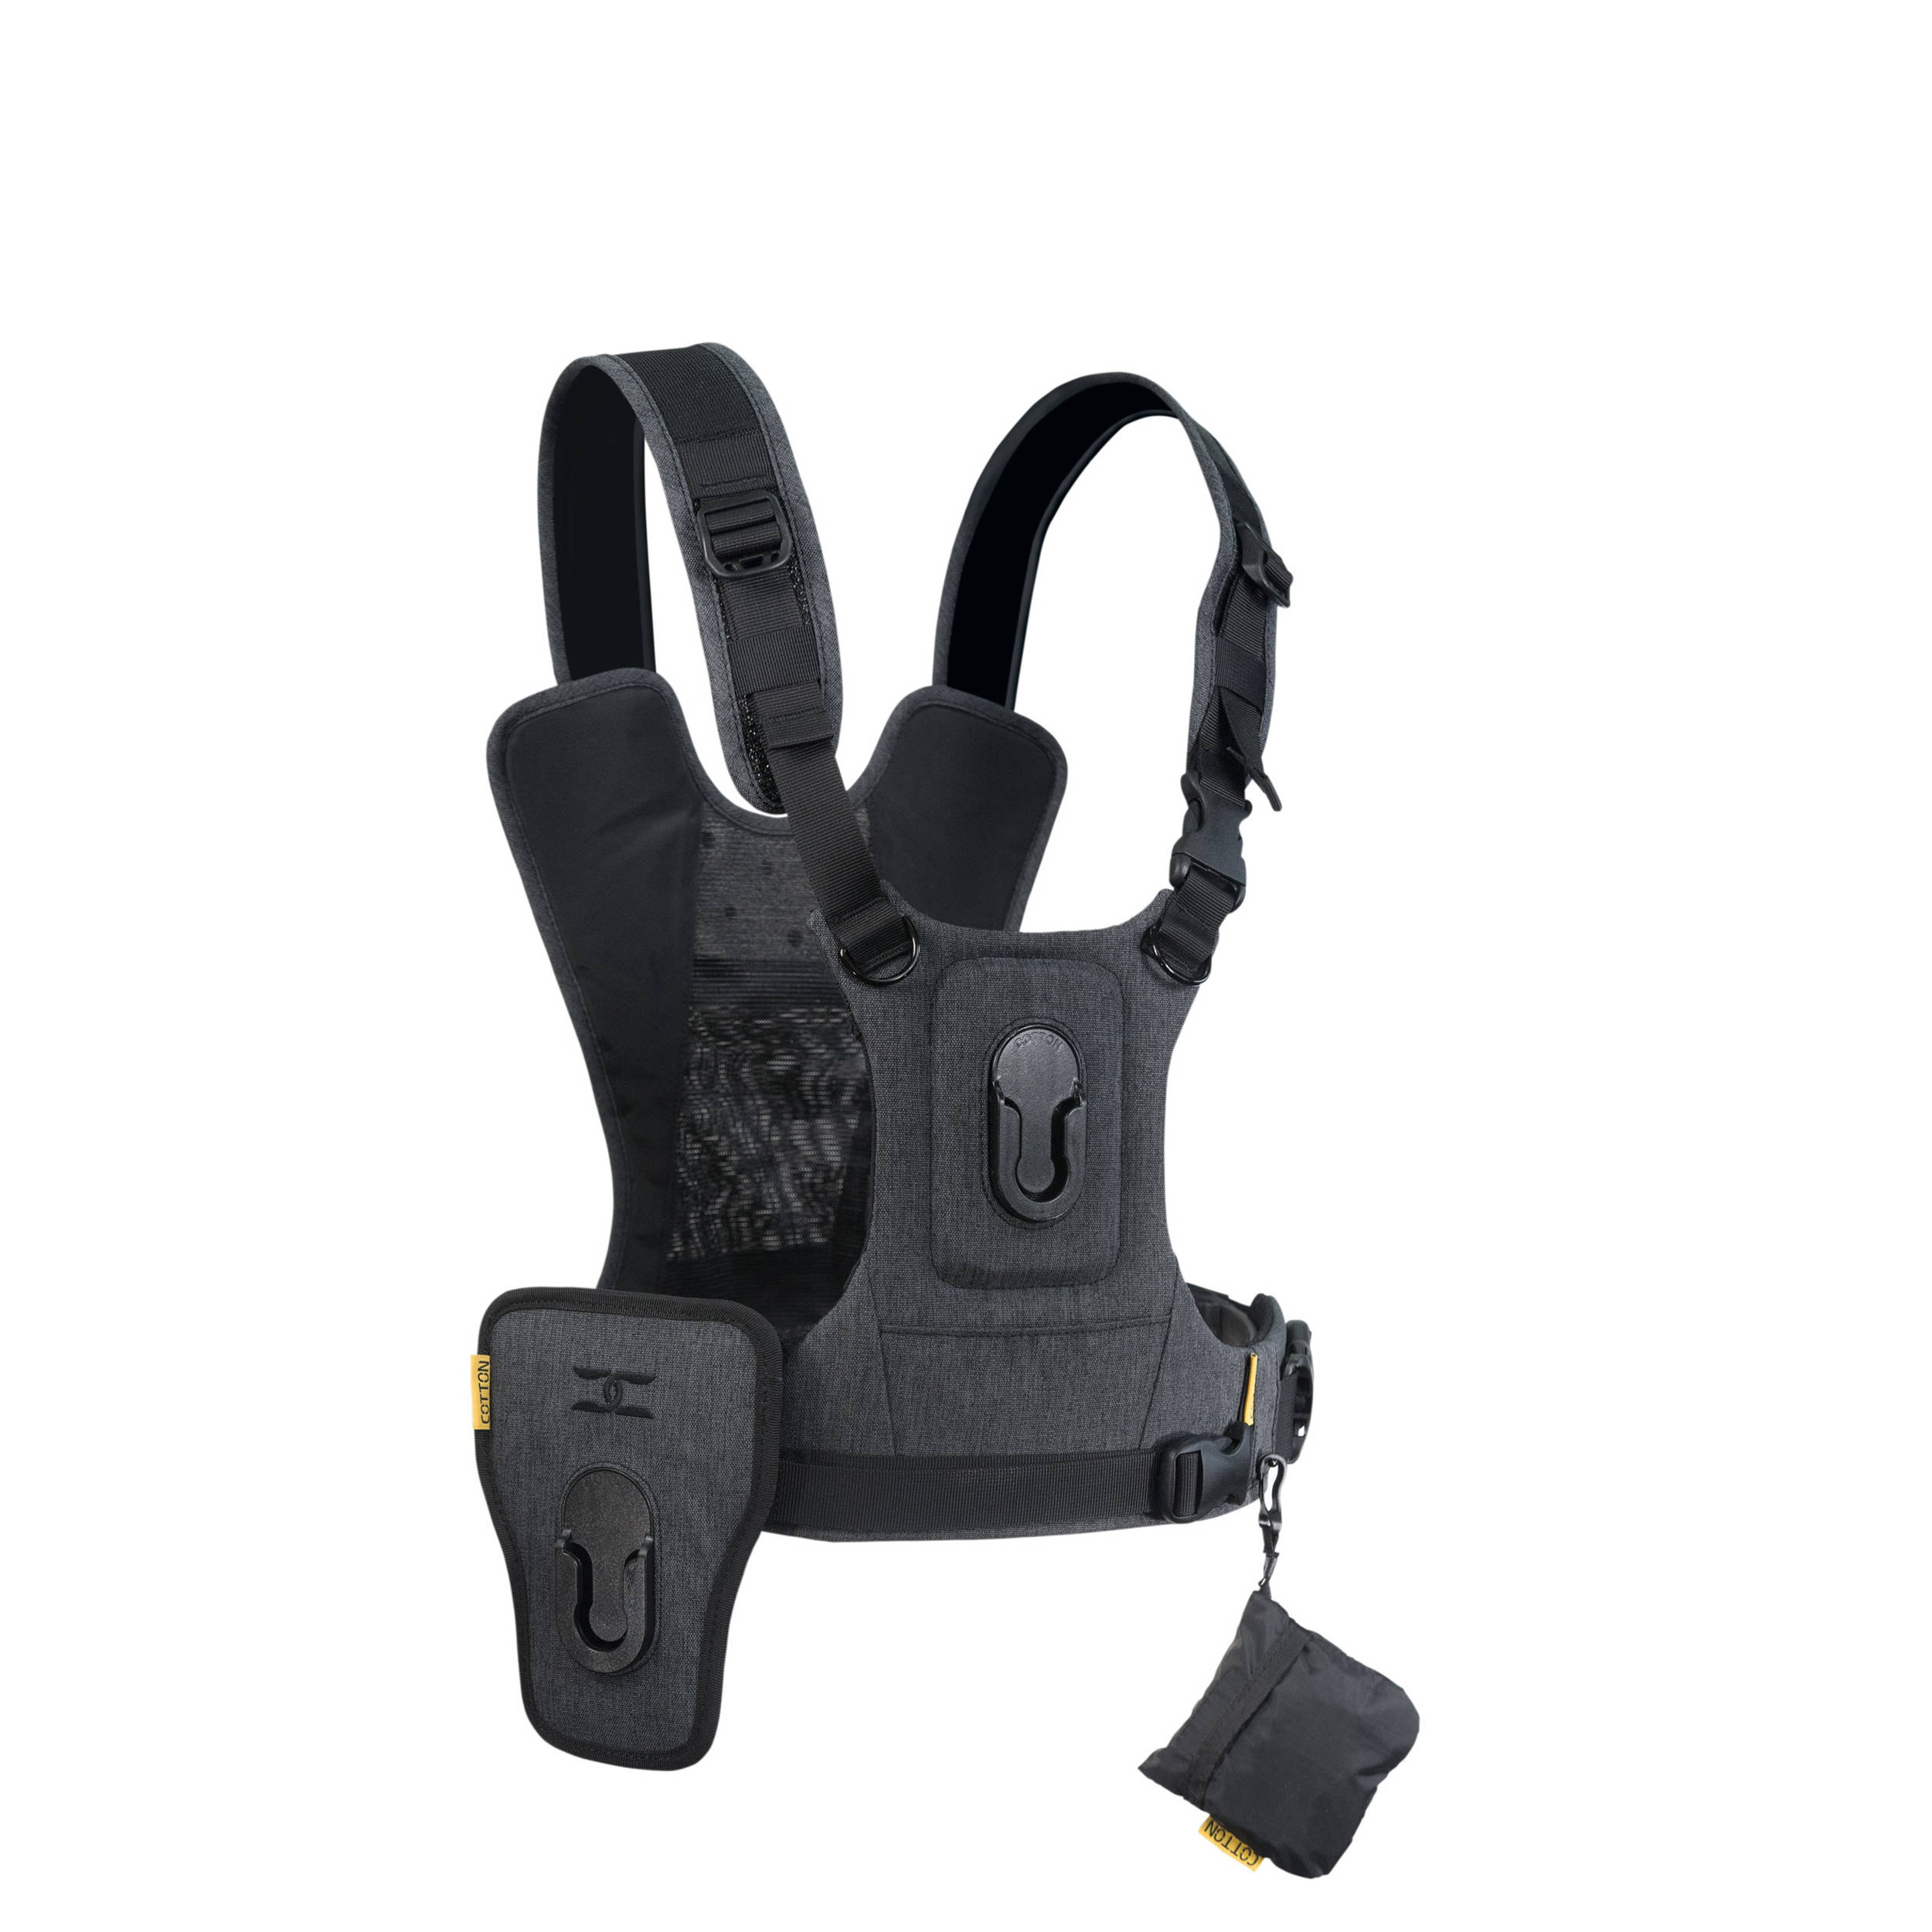 Cotton Carrier CCS G3 Harness-2 - Gray